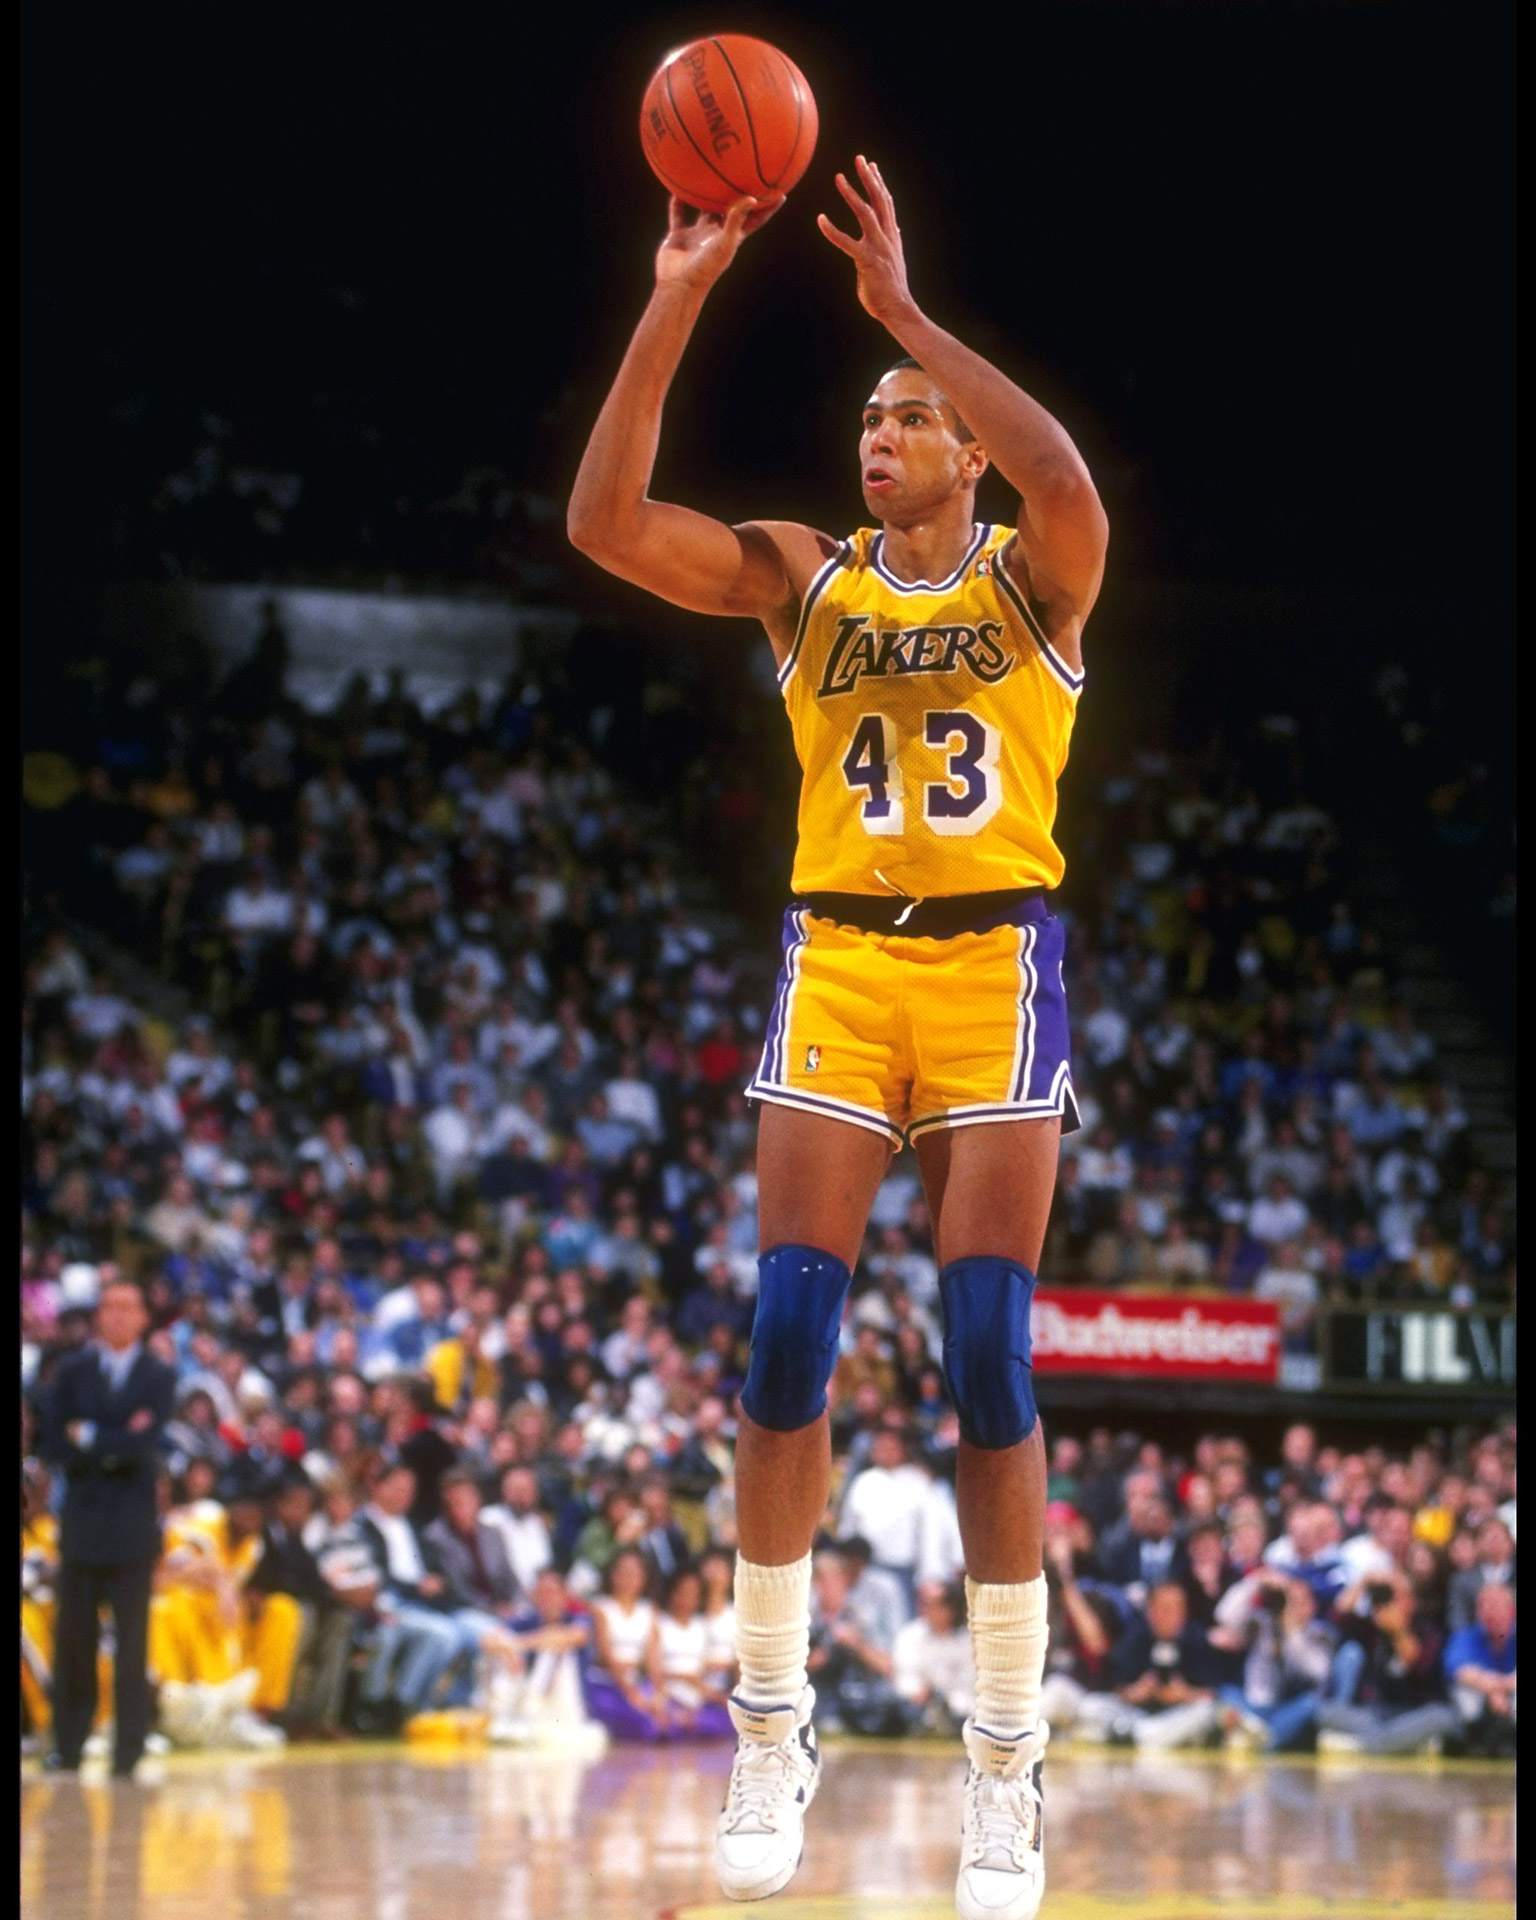 27. Mychal Thompson - 50 Greatest Lakers of All-Time - ESPN1536 x 1920